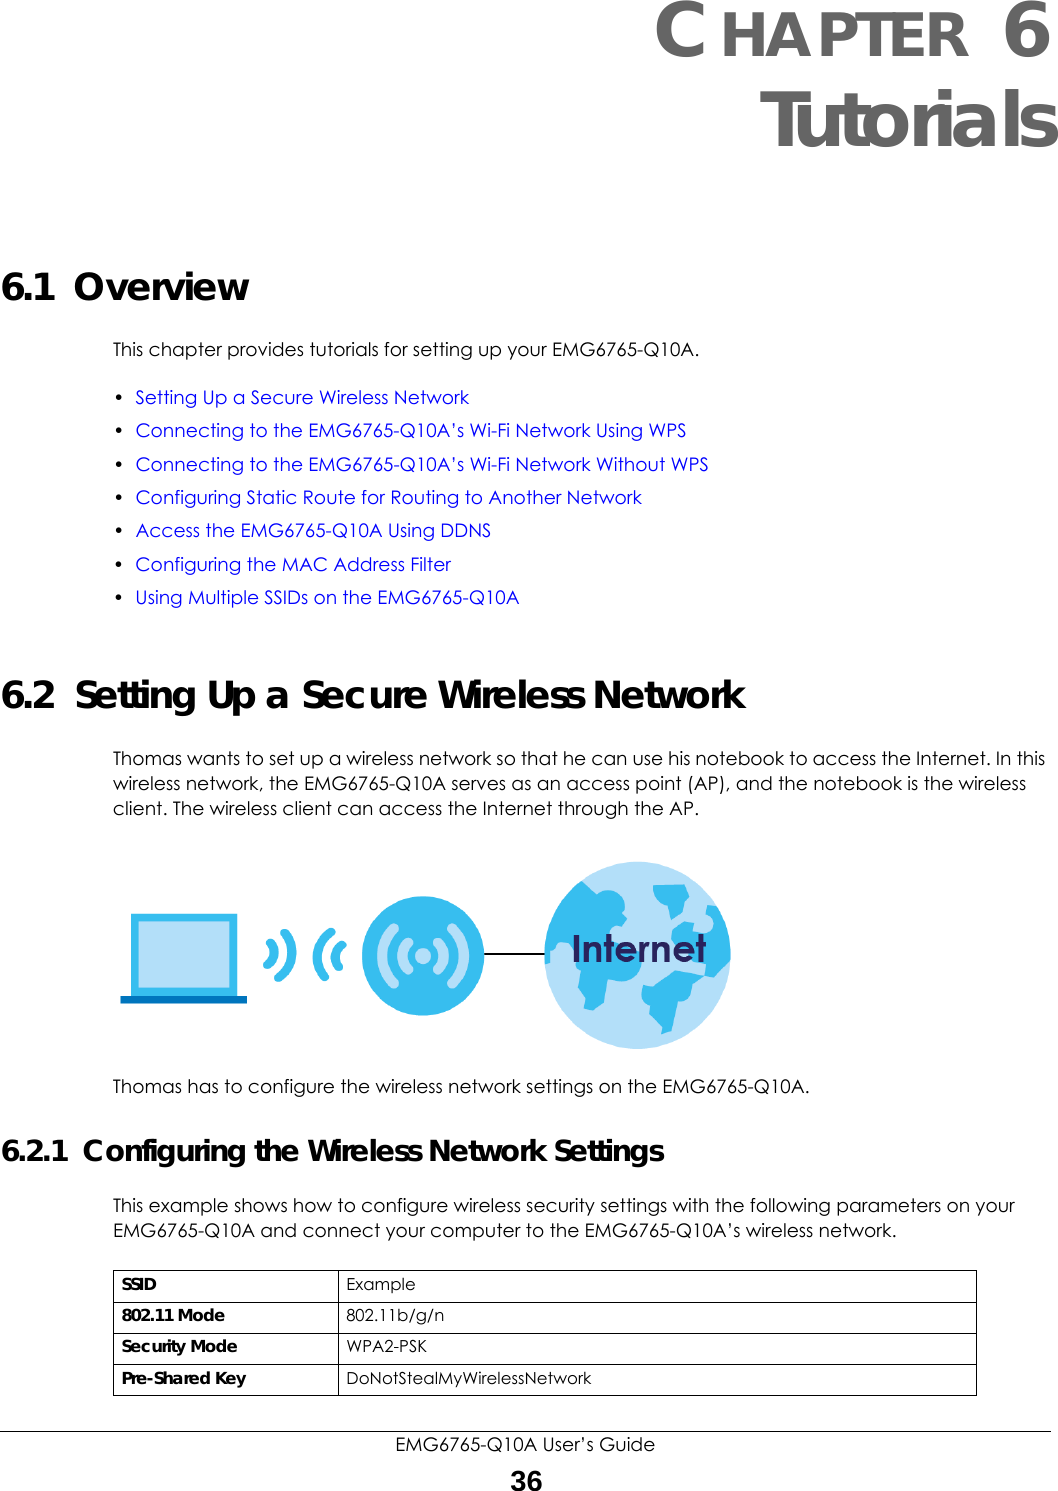 EMG6765-Q10A User’s Guide36CHAPTER 6Tutorials6.1  OverviewThis chapter provides tutorials for setting up your EMG6765-Q10A.•Setting Up a Secure Wireless Network•Connecting to the EMG6765-Q10A’s Wi-Fi Network Using WPS•Connecting to the EMG6765-Q10A’s Wi-Fi Network Without WPS•Configuring Static Route for Routing to Another Network•Access the EMG6765-Q10A Using DDNS •Configuring the MAC Address Filter•Using Multiple SSIDs on the EMG6765-Q10A6.2  Setting Up a Secure Wireless NetworkThomas wants to set up a wireless network so that he can use his notebook to access the Internet. In this wireless network, the EMG6765-Q10A serves as an access point (AP), and the notebook is the wireless client. The wireless client can access the Internet through the AP.Thomas has to configure the wireless network settings on the EMG6765-Q10A.6.2.1  Configuring the Wireless Network SettingsThis example shows how to configure wireless security settings with the following parameters on your EMG6765-Q10A and connect your computer to the EMG6765-Q10A’s wireless network.SSID Example802.11 Mode 802.11b/g/nSecurity Mode WPA2-PSKPre-Shared Key DoNotStealMyWirelessNetwork